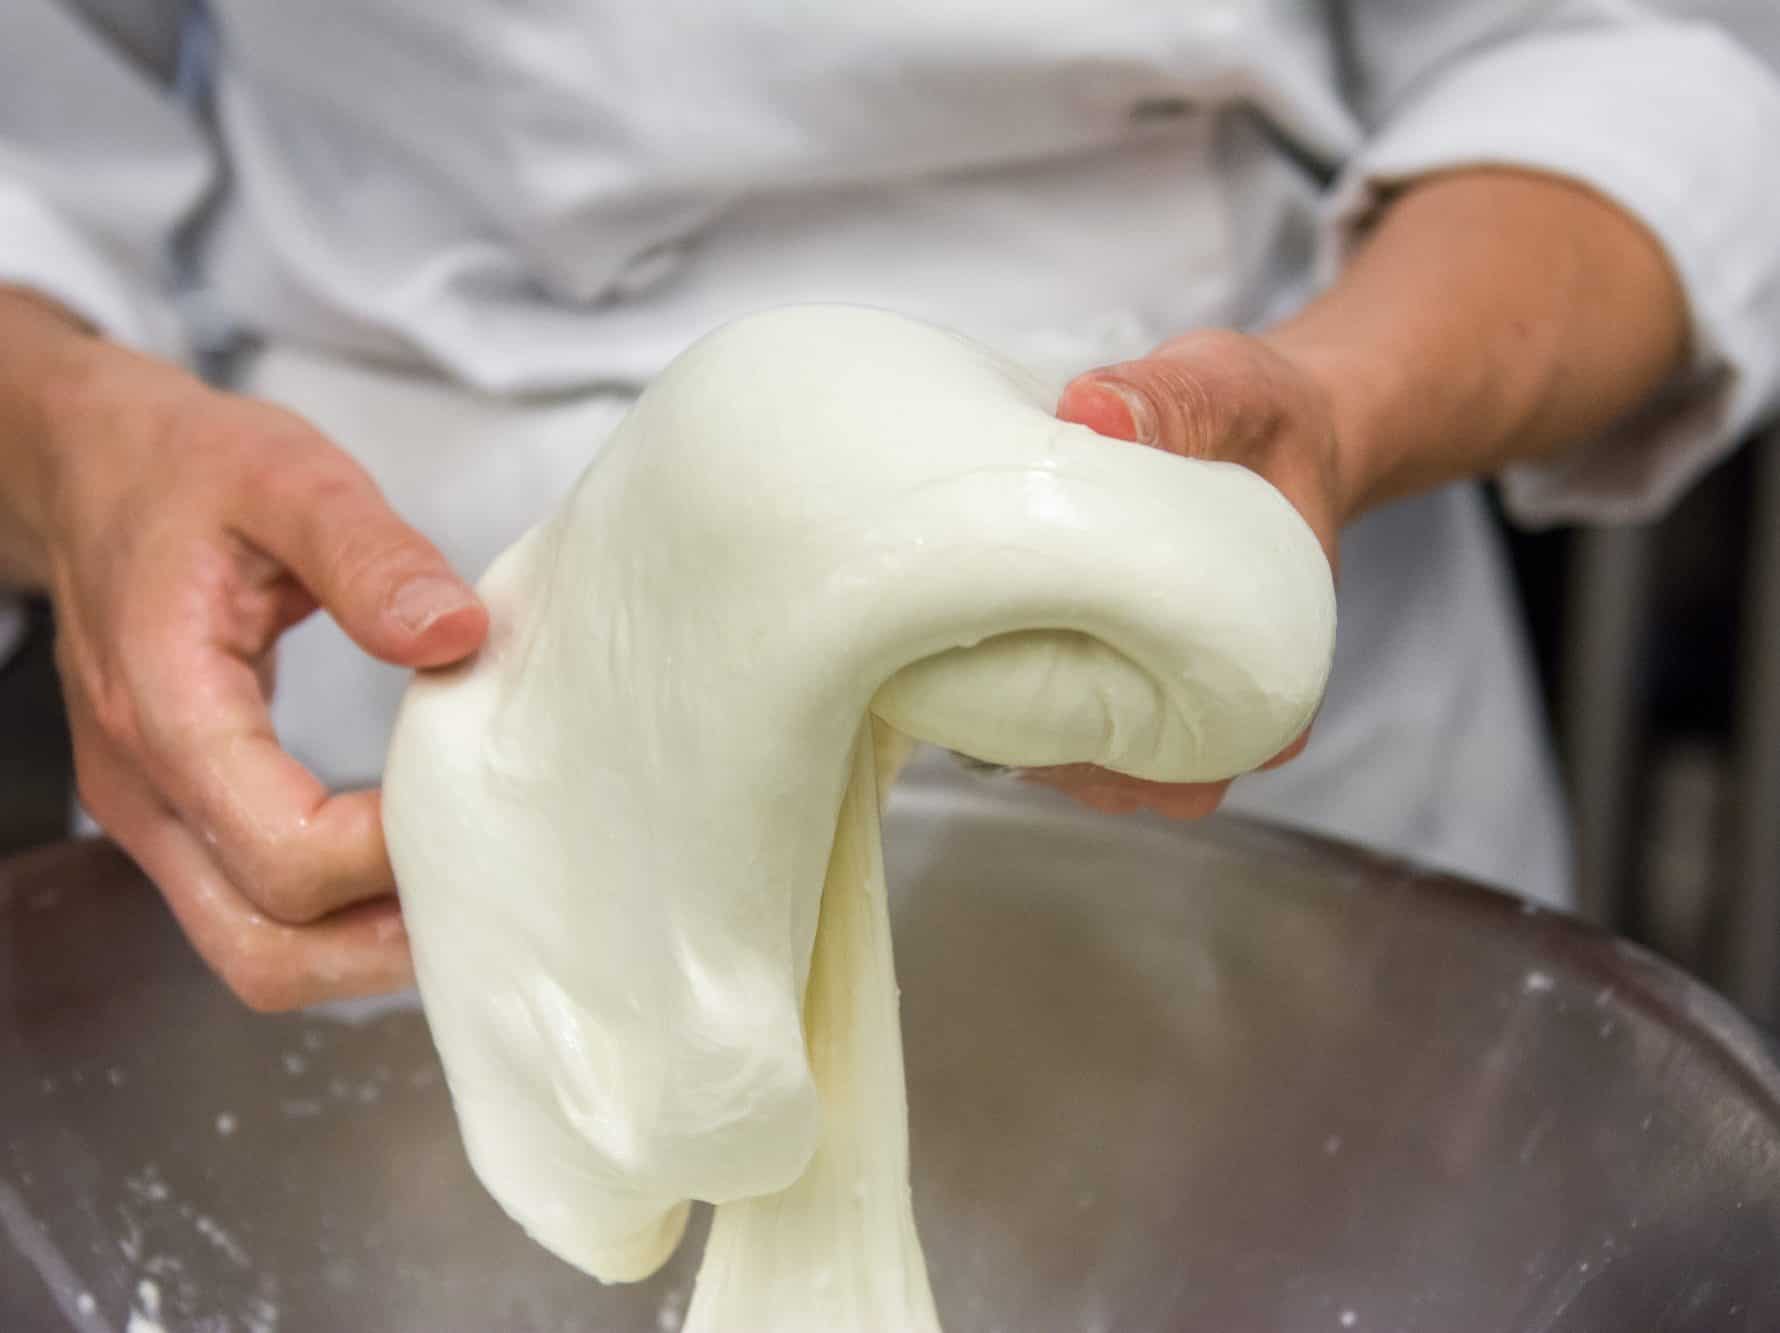 stretching curd to make mozzarella by hand